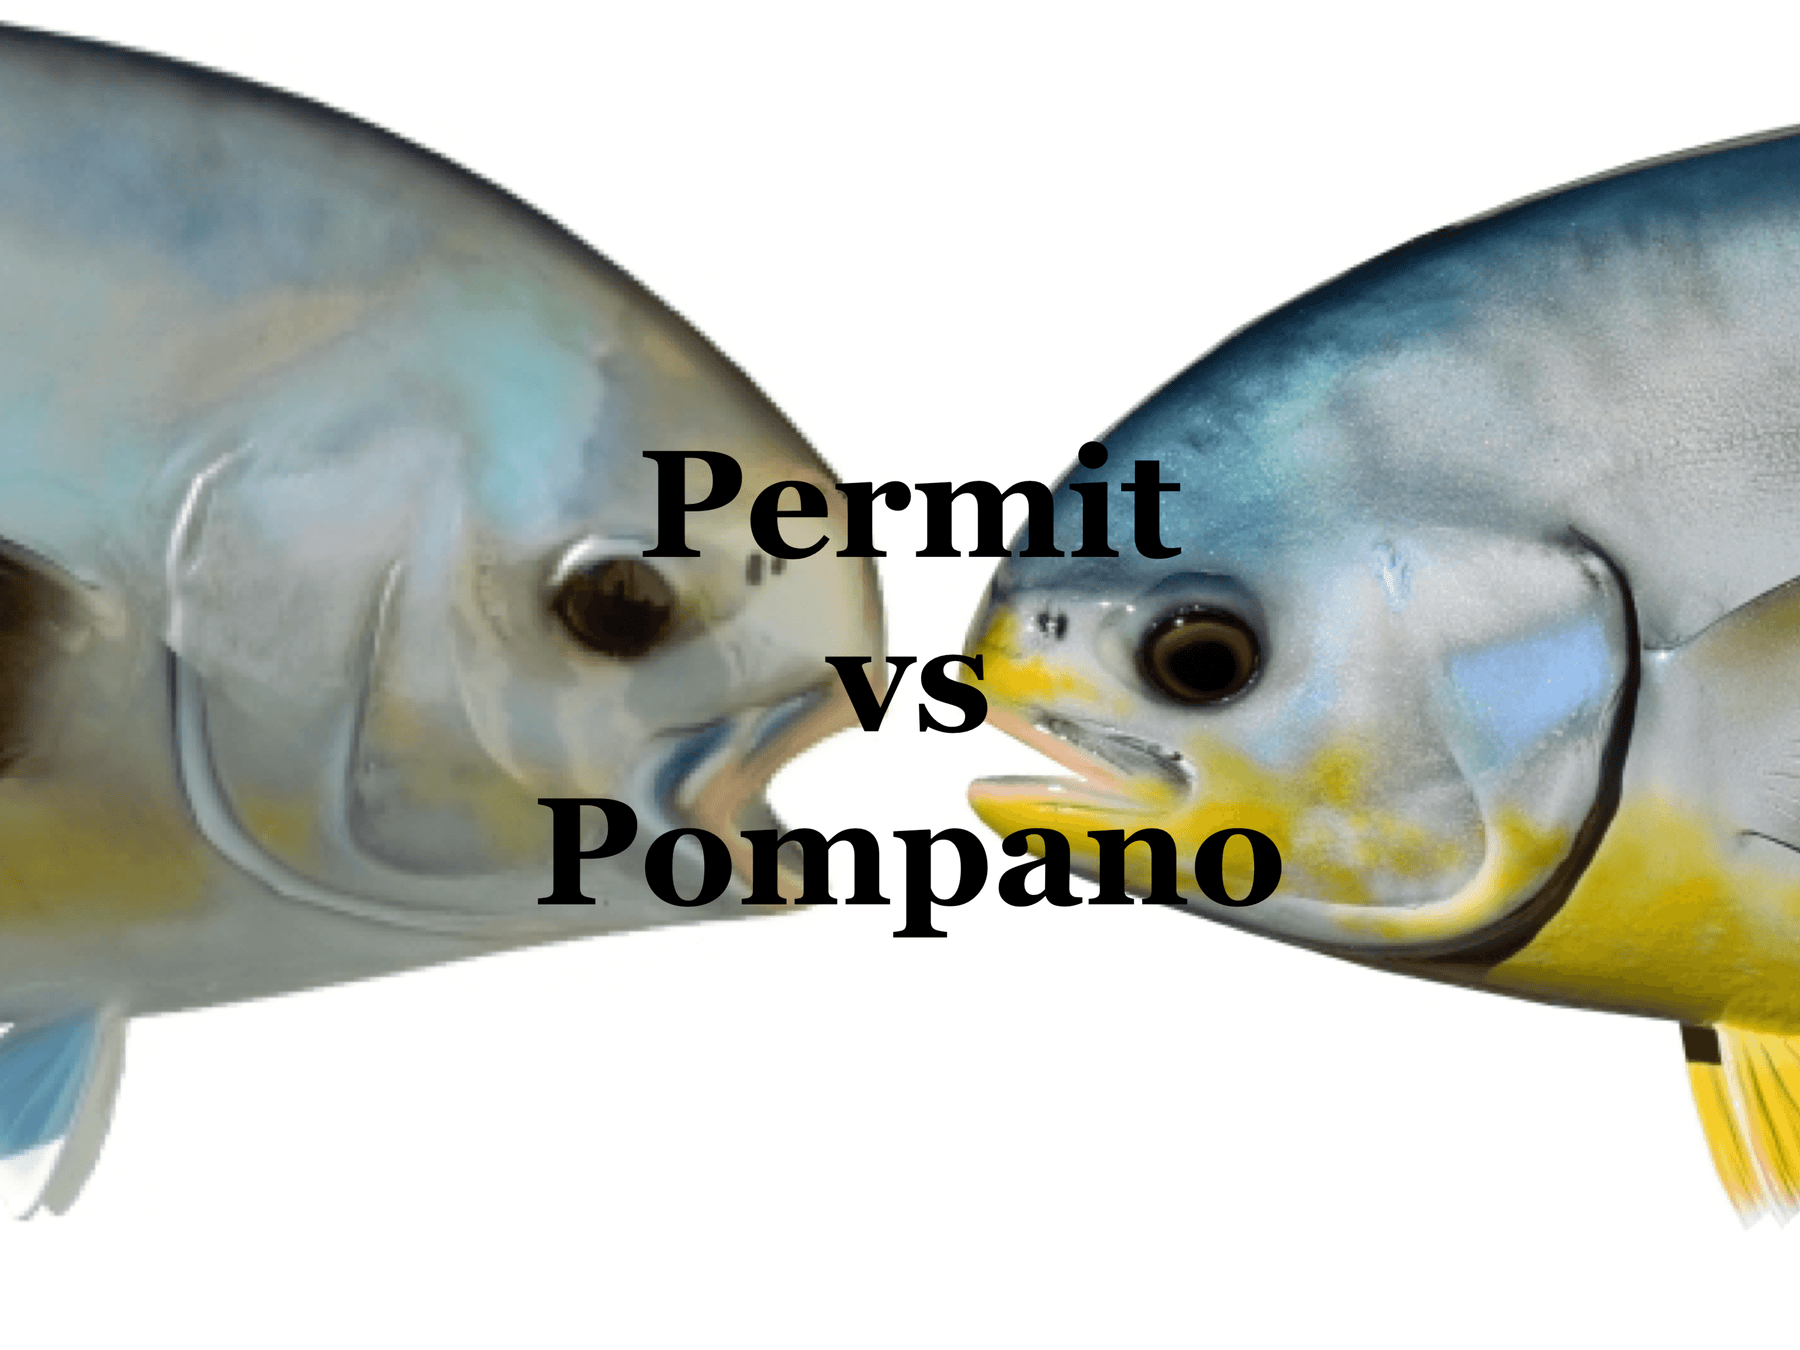 Permit vs Pompano: Can You Tell The Difference?